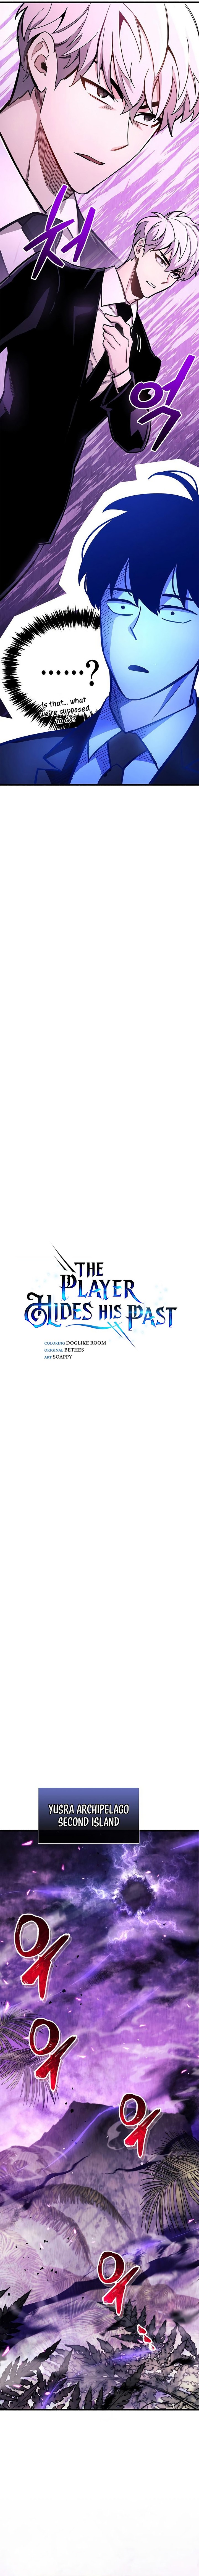 the_player_hides_his_past_20_4